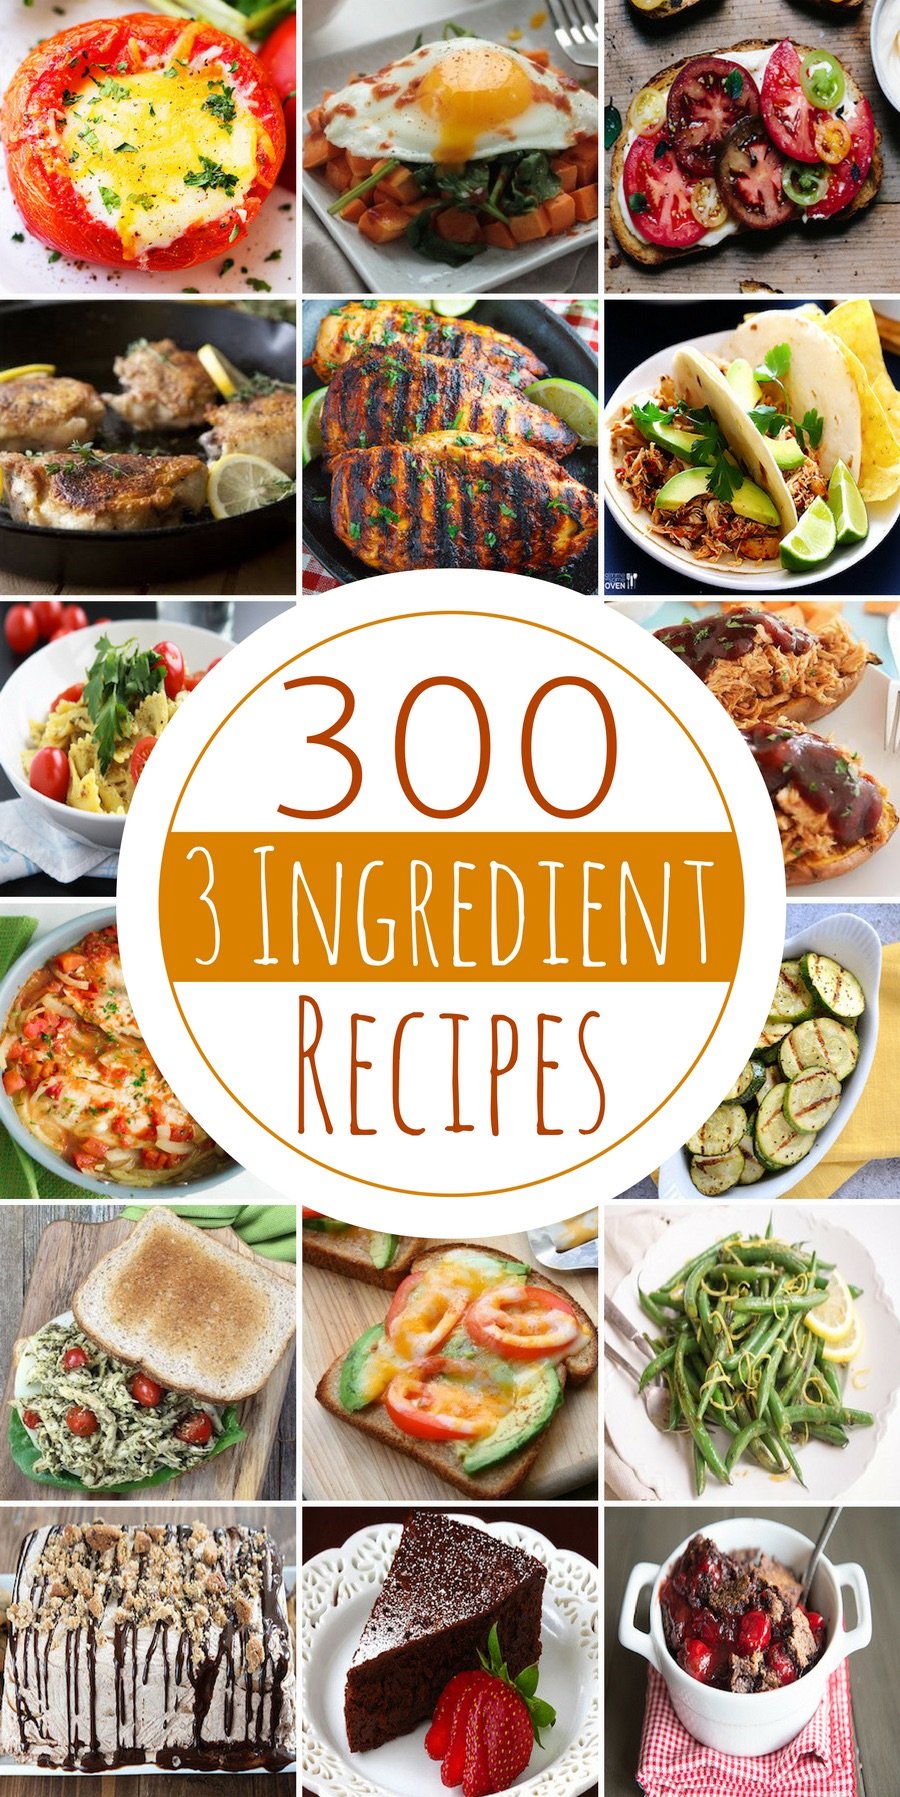 Easy as 1-2-3: Delicious 3 Ingredient Recipes